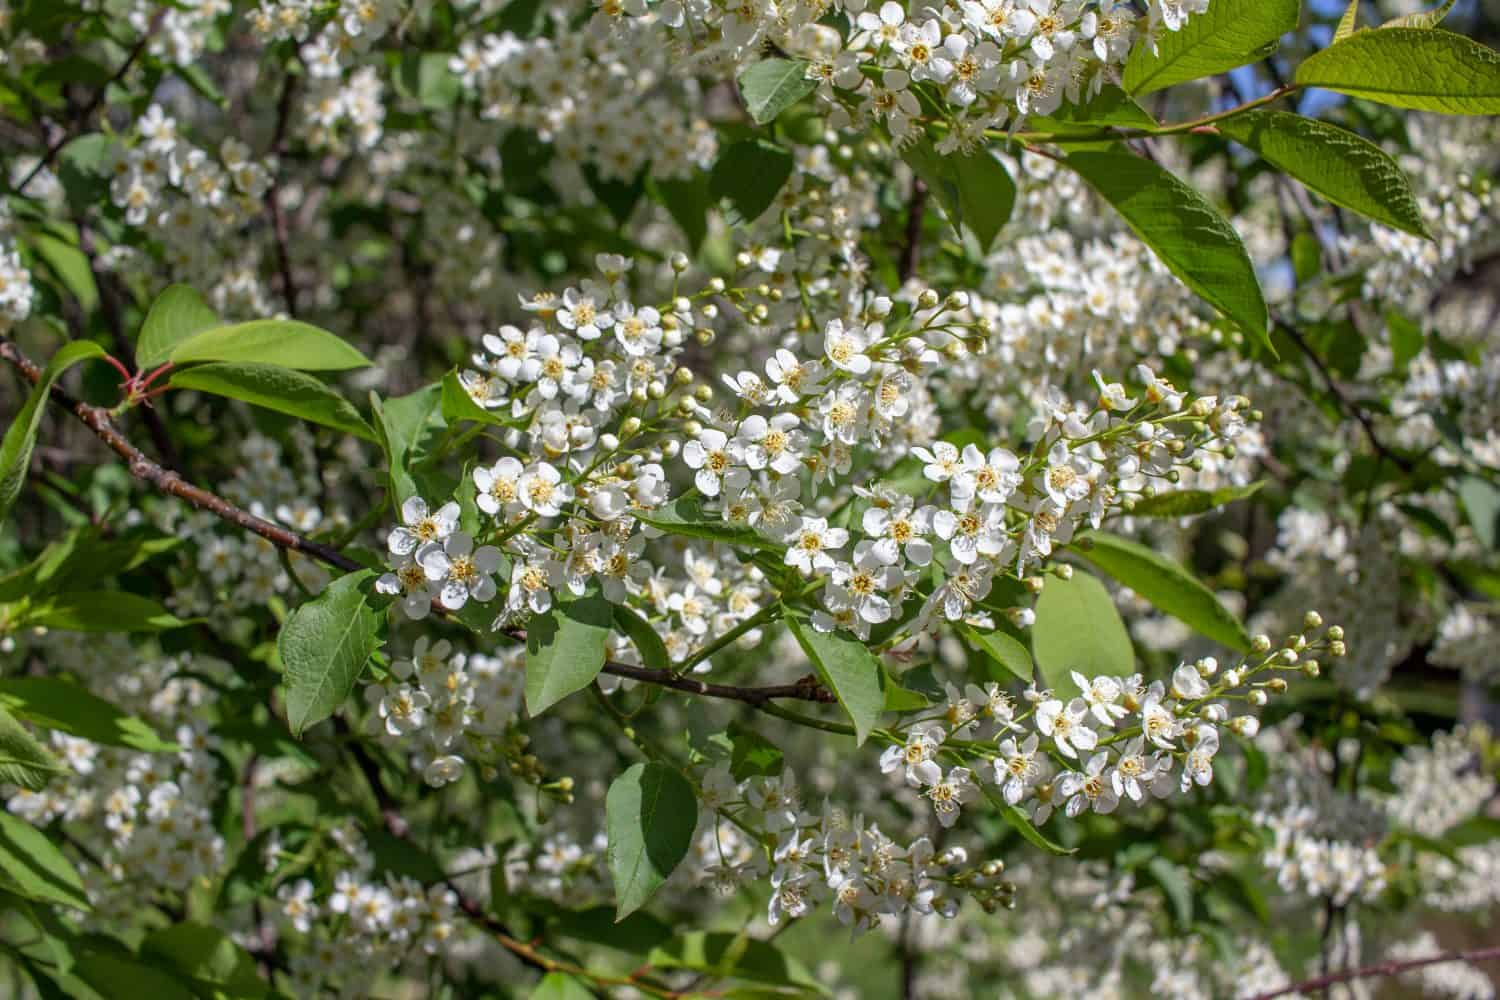 Close up view of emerging white flowers on a Canada red chokecherry tree in spring